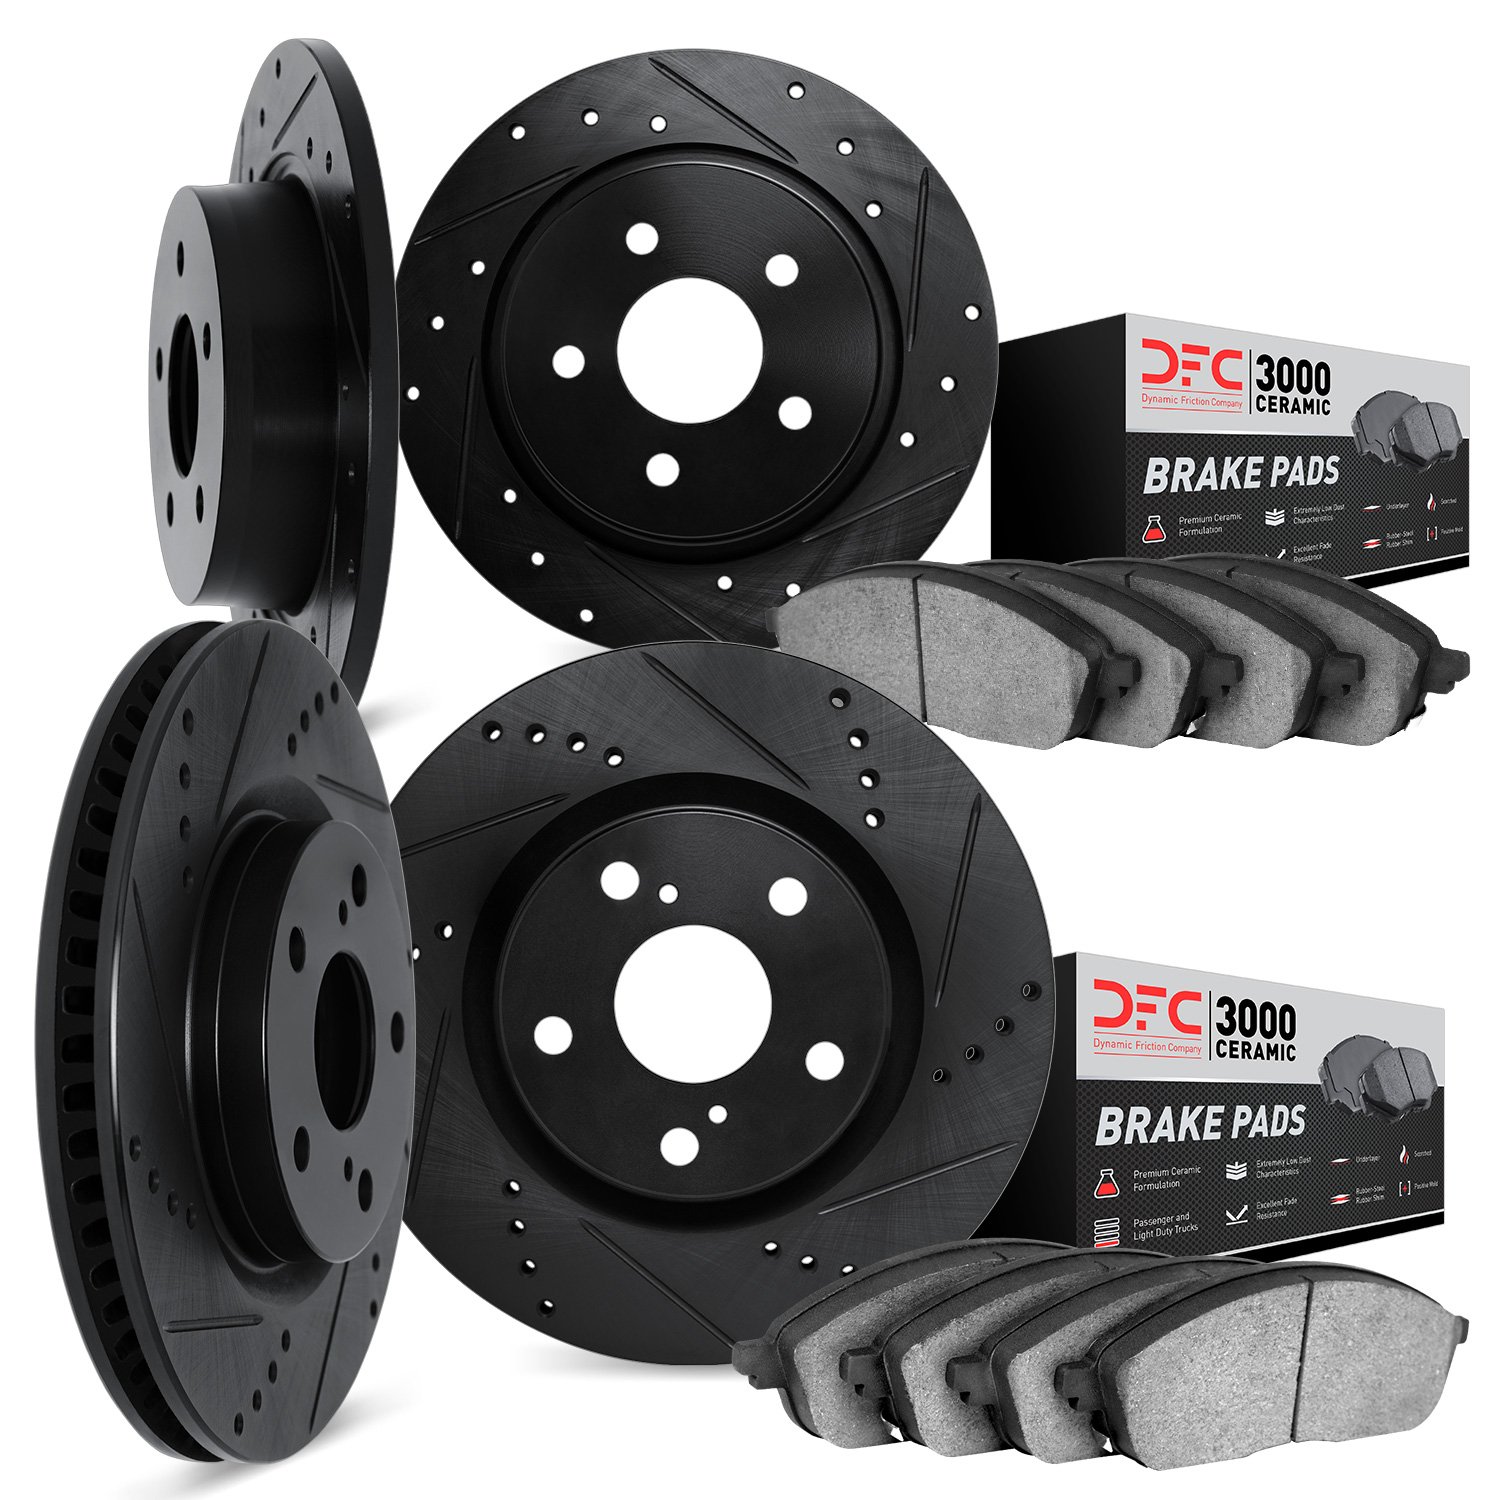 8304-59063 Drilled/Slotted Brake Rotors with 3000-Series Ceramic Brake Pads Kit [Black], 2011-2014 Acura/Honda, Position: Front